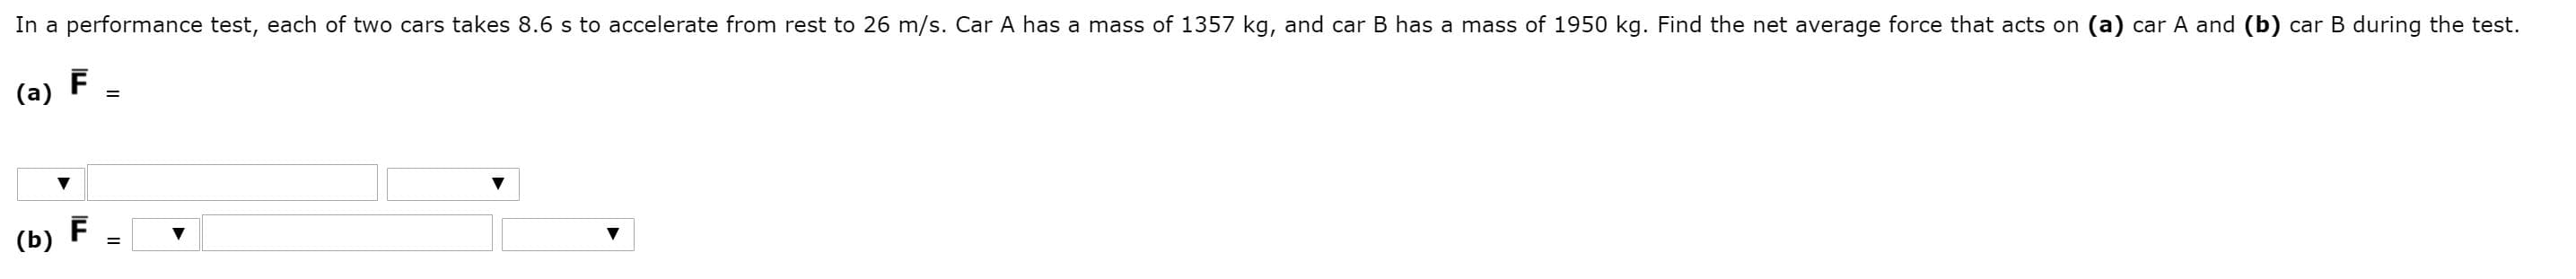 In a performance test, each of two cars takes 8.6 s to accelerate from rest to 26 m/s. Car A has a mass of 1357 kg, and car B has a mass of 1950 kg. Find the net average force that acts on (a) car A and (b) car B during the test.
(a)
(b)
